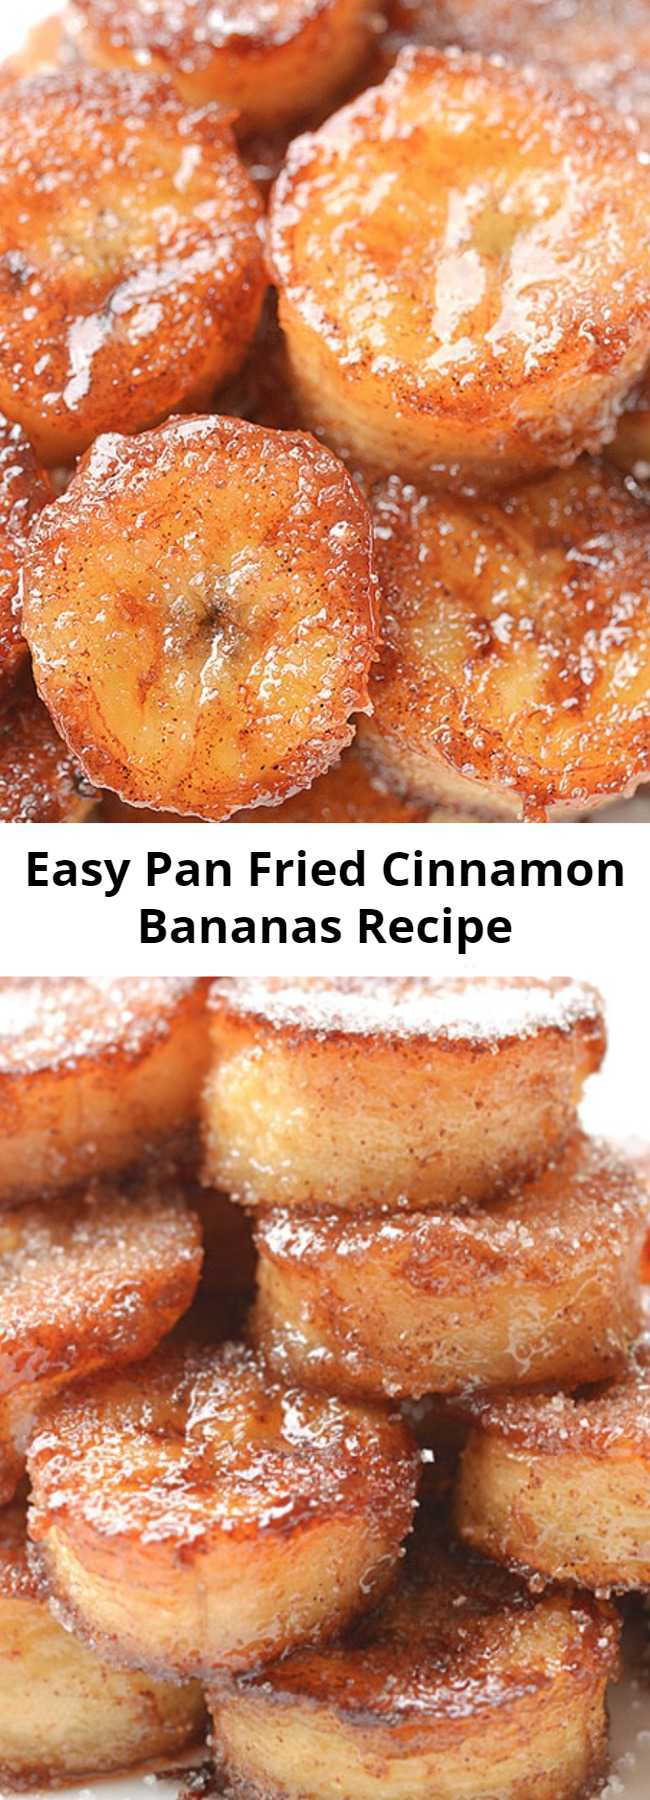 Easy Pan Fried Cinnamon Bananas Recipe - These pan fried cinnamon bananas are soooooo good! They only take a few minutes to make and they transform boring old bananas into a drool-worthy snack or dessert. I eat my pan fried bananas all on their own, but they would taste amazing (seriously AMAZING) served over ice cream. They’re caramelized on the outside with a soft and sweet inside and make a great dessert topping. Yum!